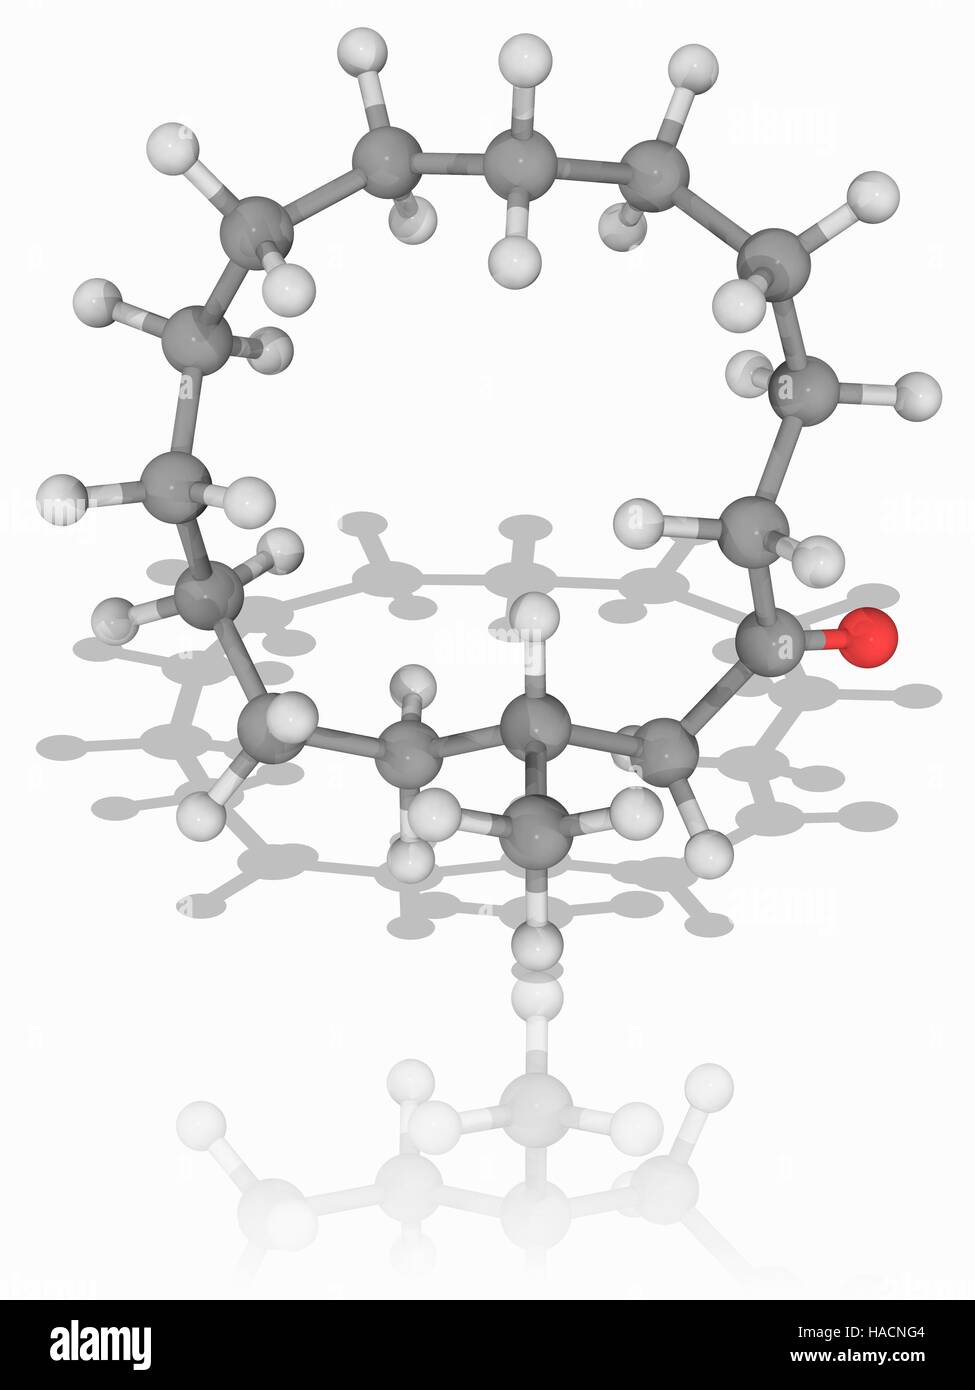 Muscone. Molecular model of the organic compound muscone (C16.H30.O), a macrocyclic ketone that is the primary cause of musk odour. Atoms are represented as spheres and are colour-coded: carbon (grey), hydrogen (white) and oxygen (red). Illustration. Stock Photo